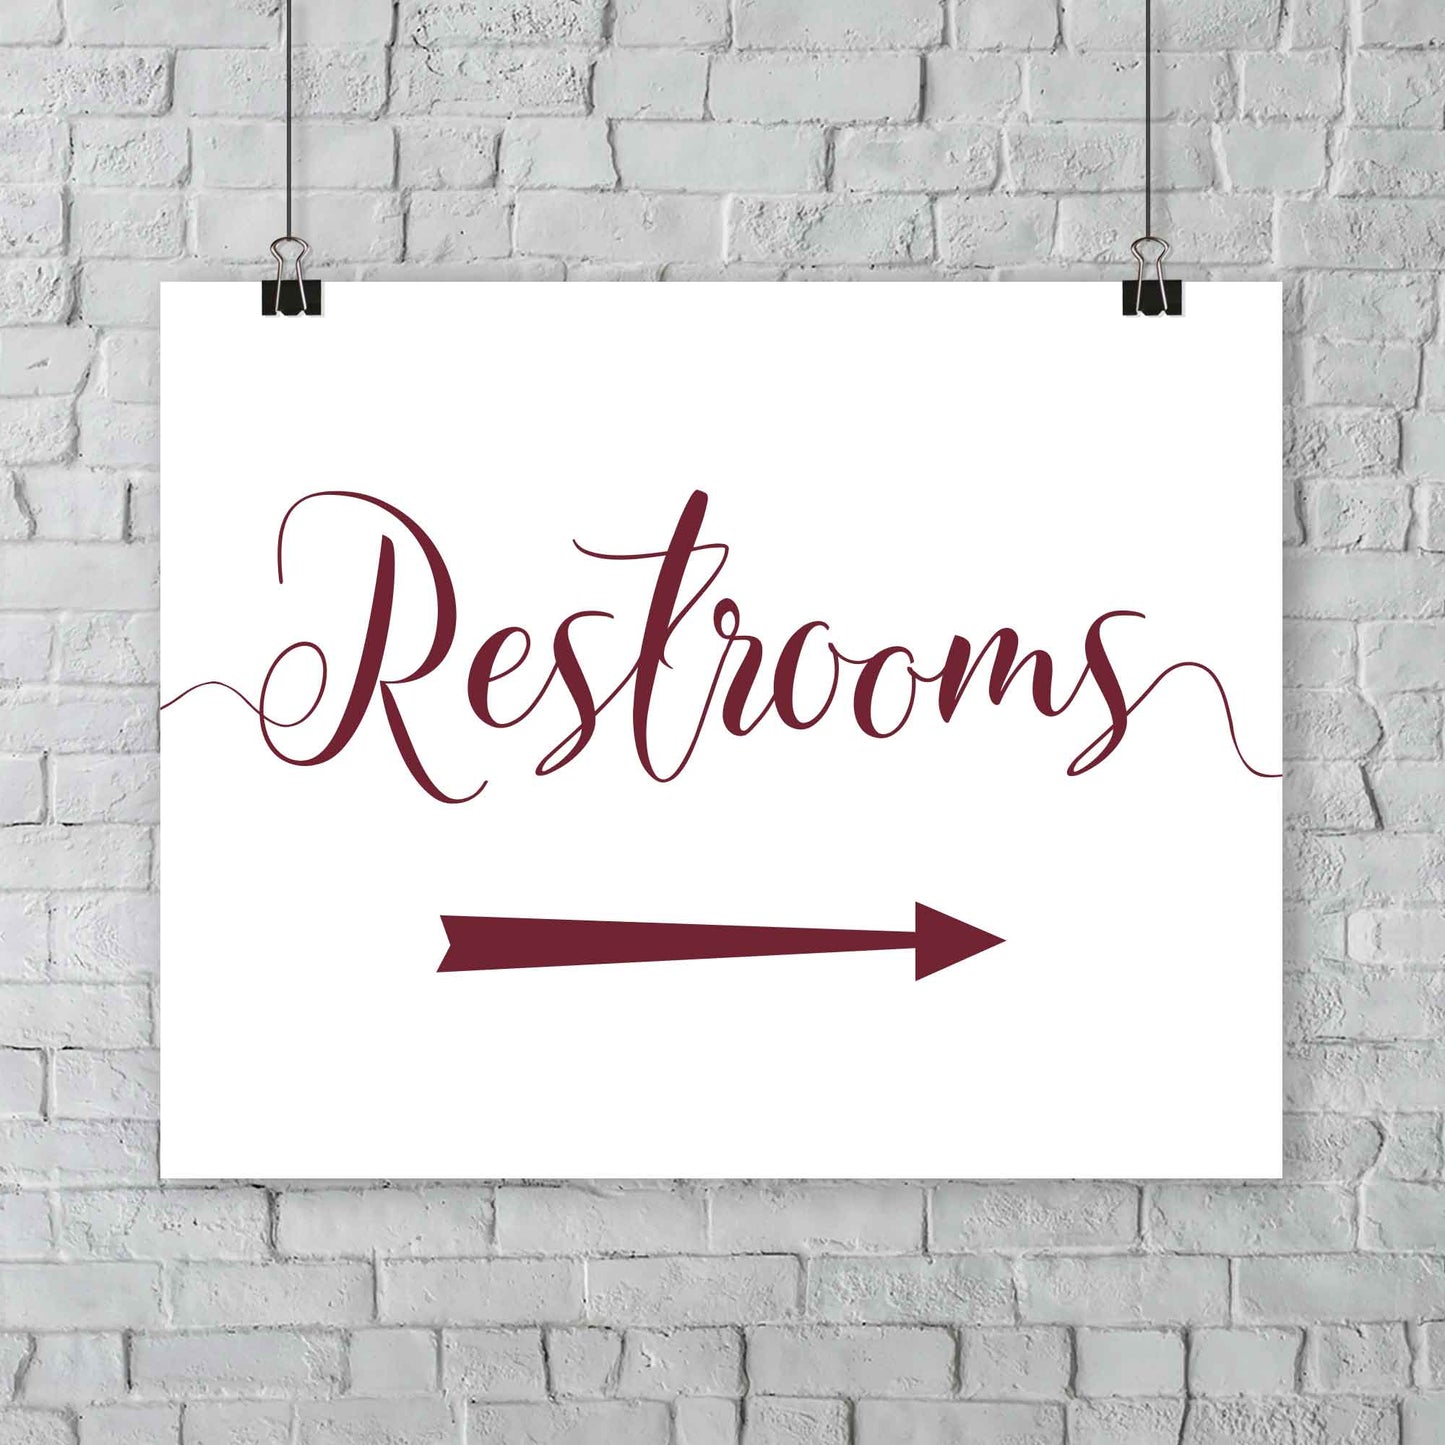 auburn wedding restrooms arrow signage hanging from a wall